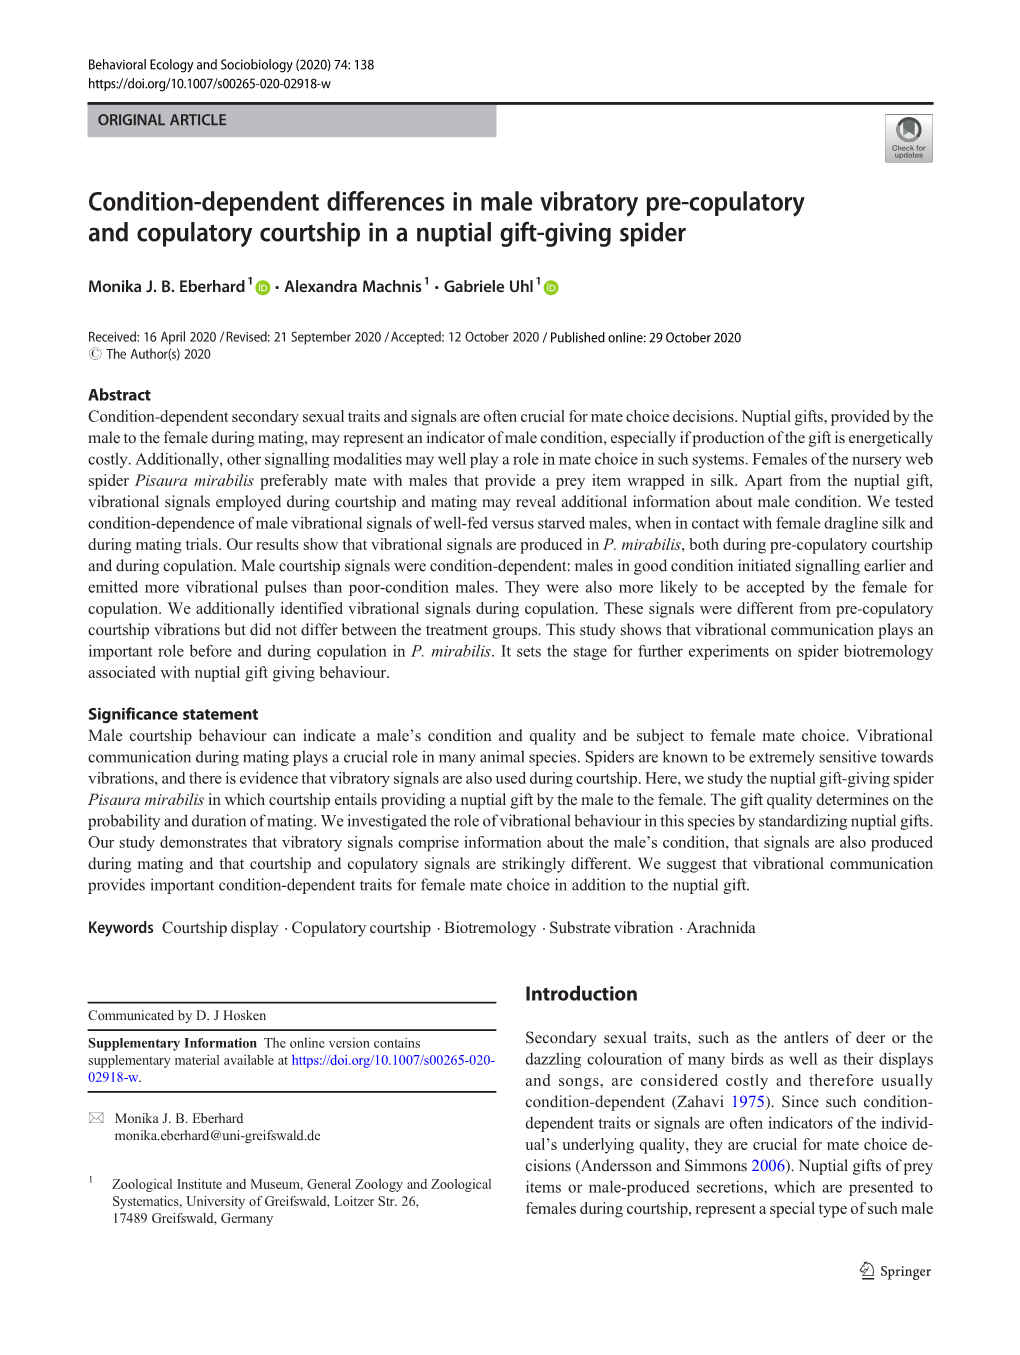 Condition-Dependent Differences in Male Vibratory Pre-Copulatory and Copulatory Courtship in a Nuptial Gift-Giving Spider